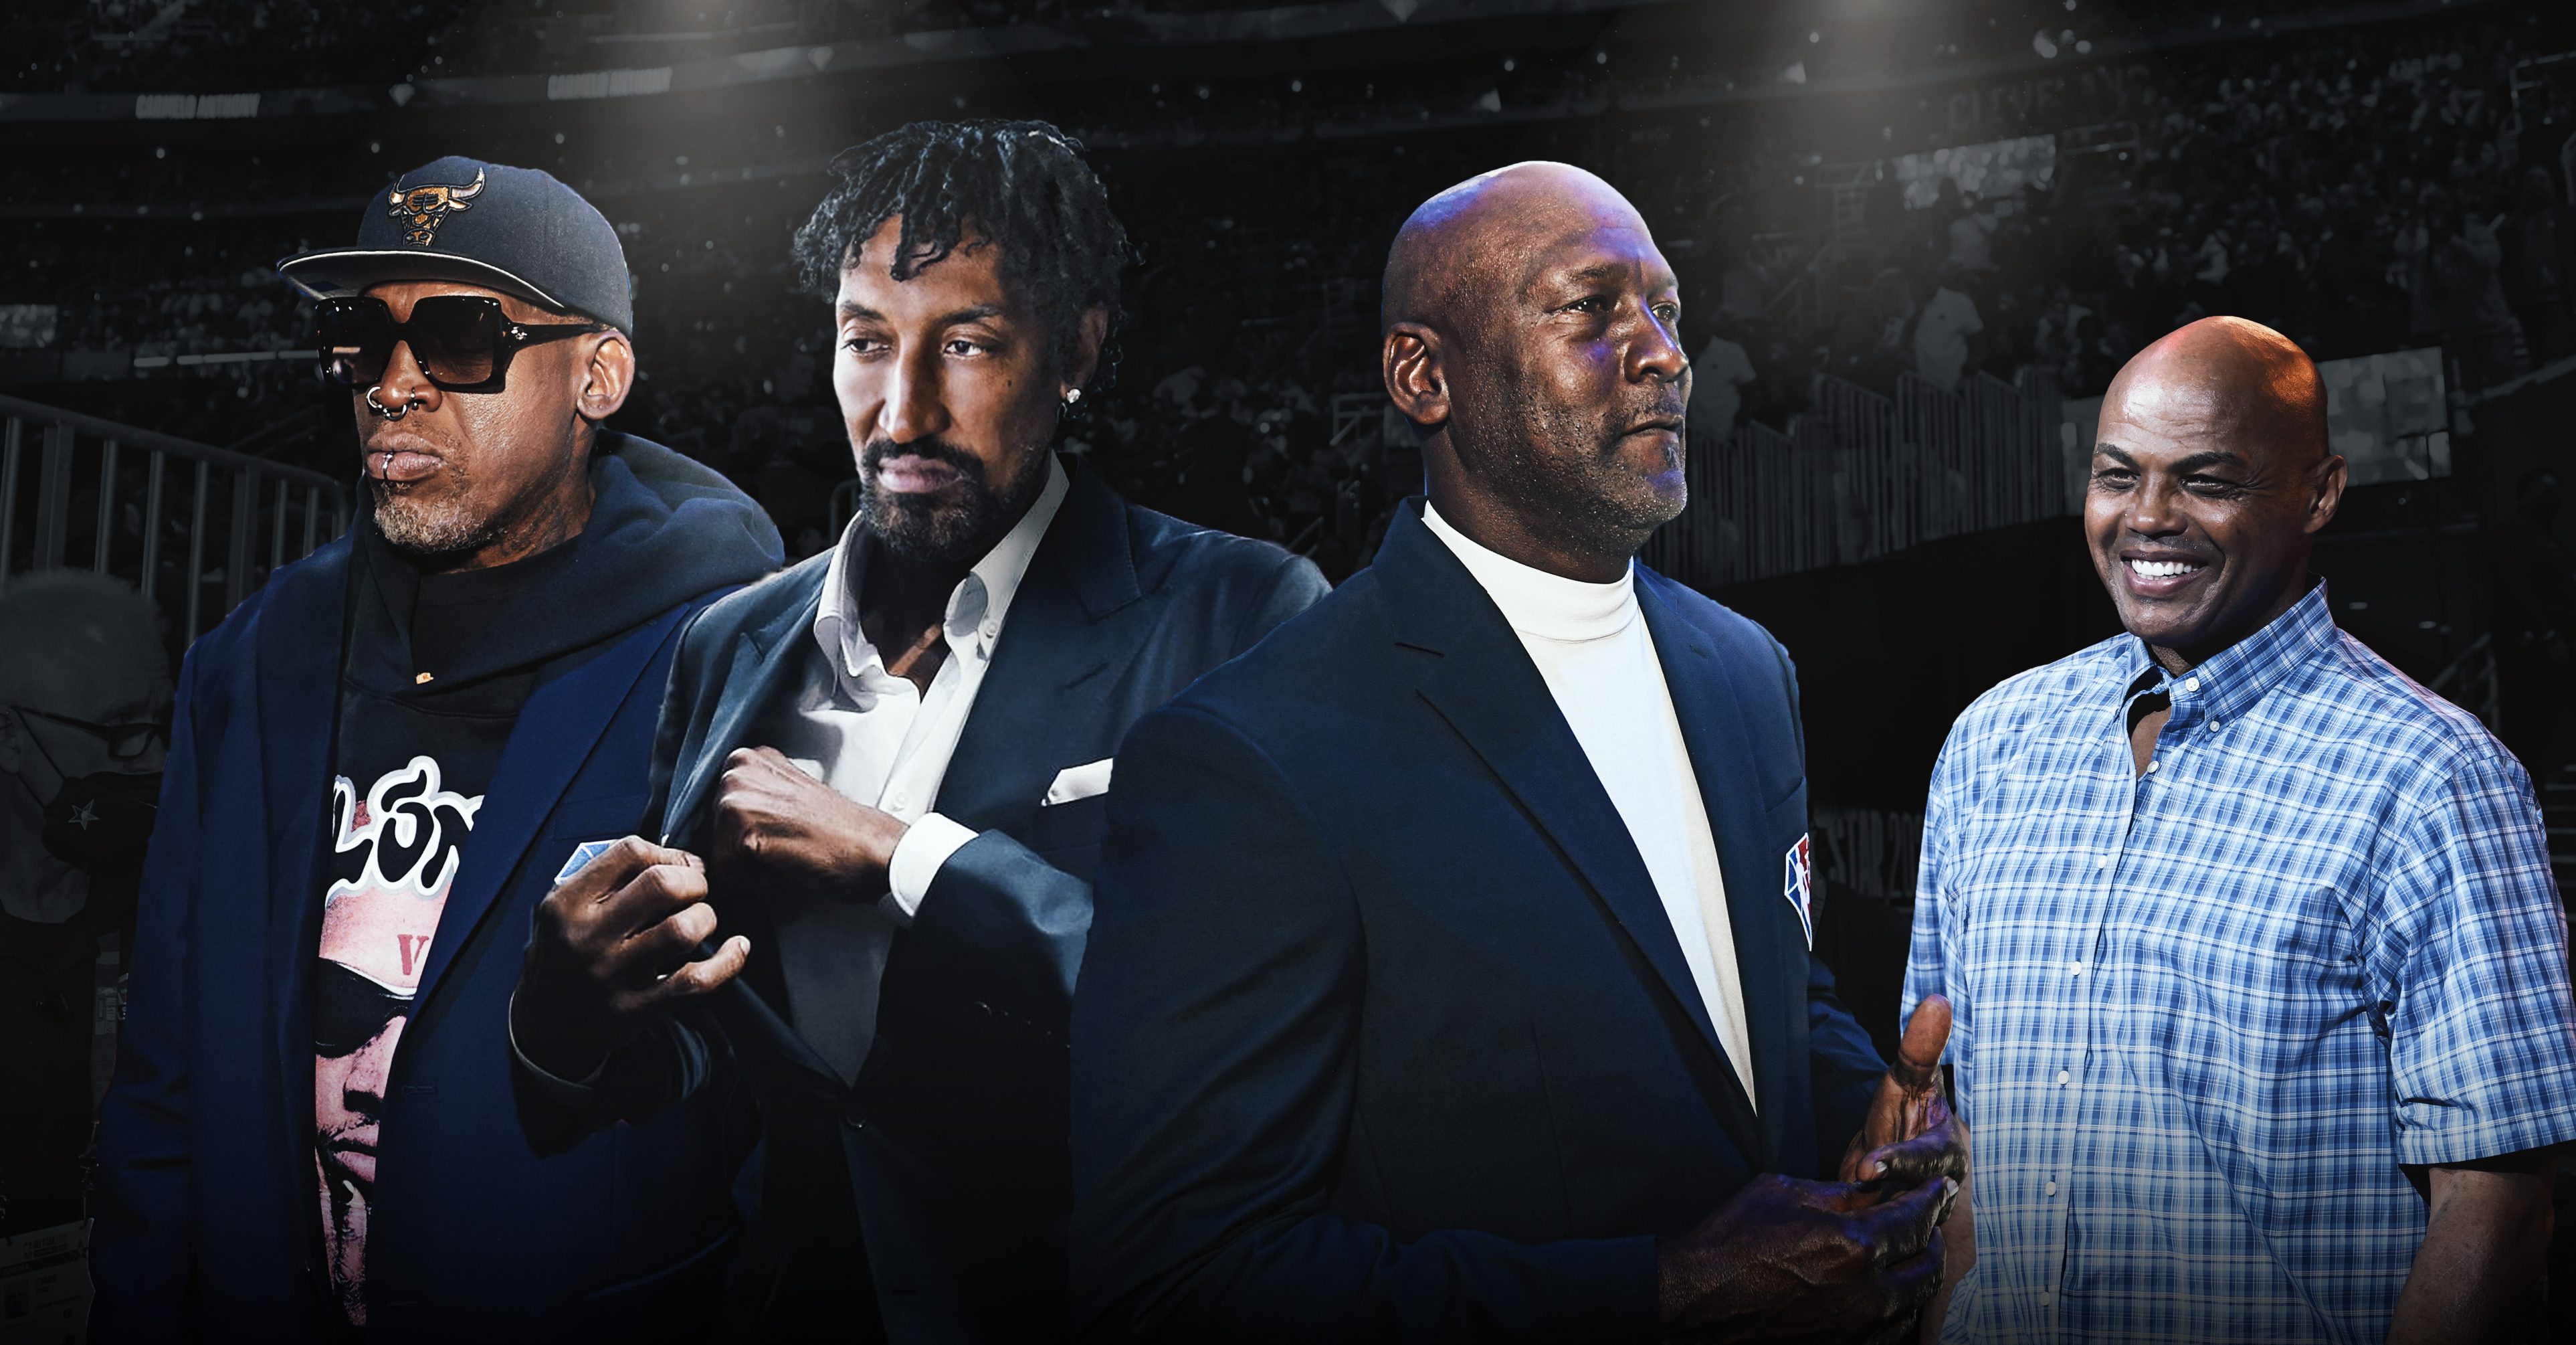 Bulls’ Ring of Honor Going To Be an Awkward As Hell Reunion